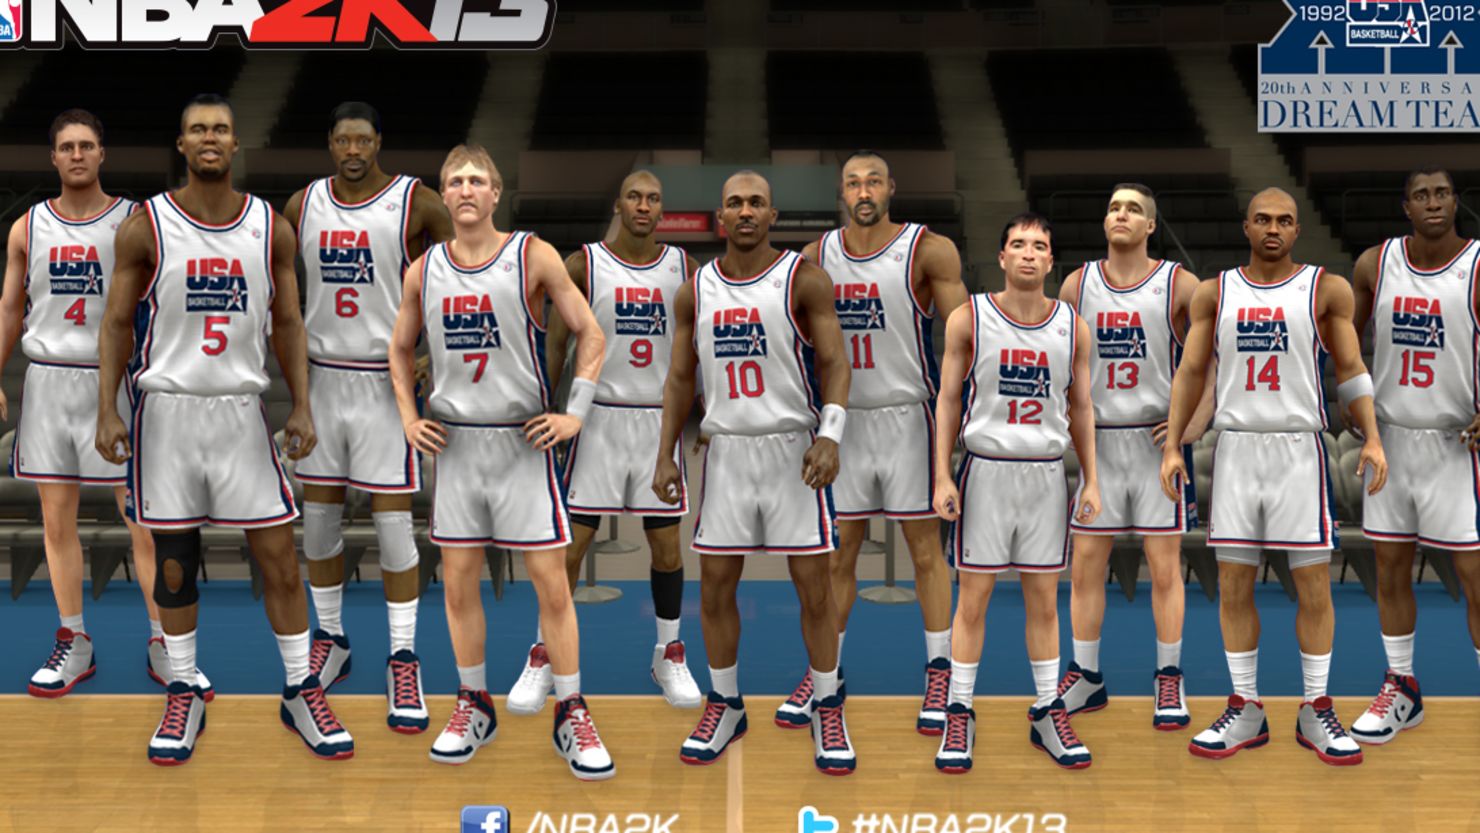 Michael Jordan, No. 9, and other members of the "Dream Team" that won gold in the 1992 Olympic Games in Barcelona.